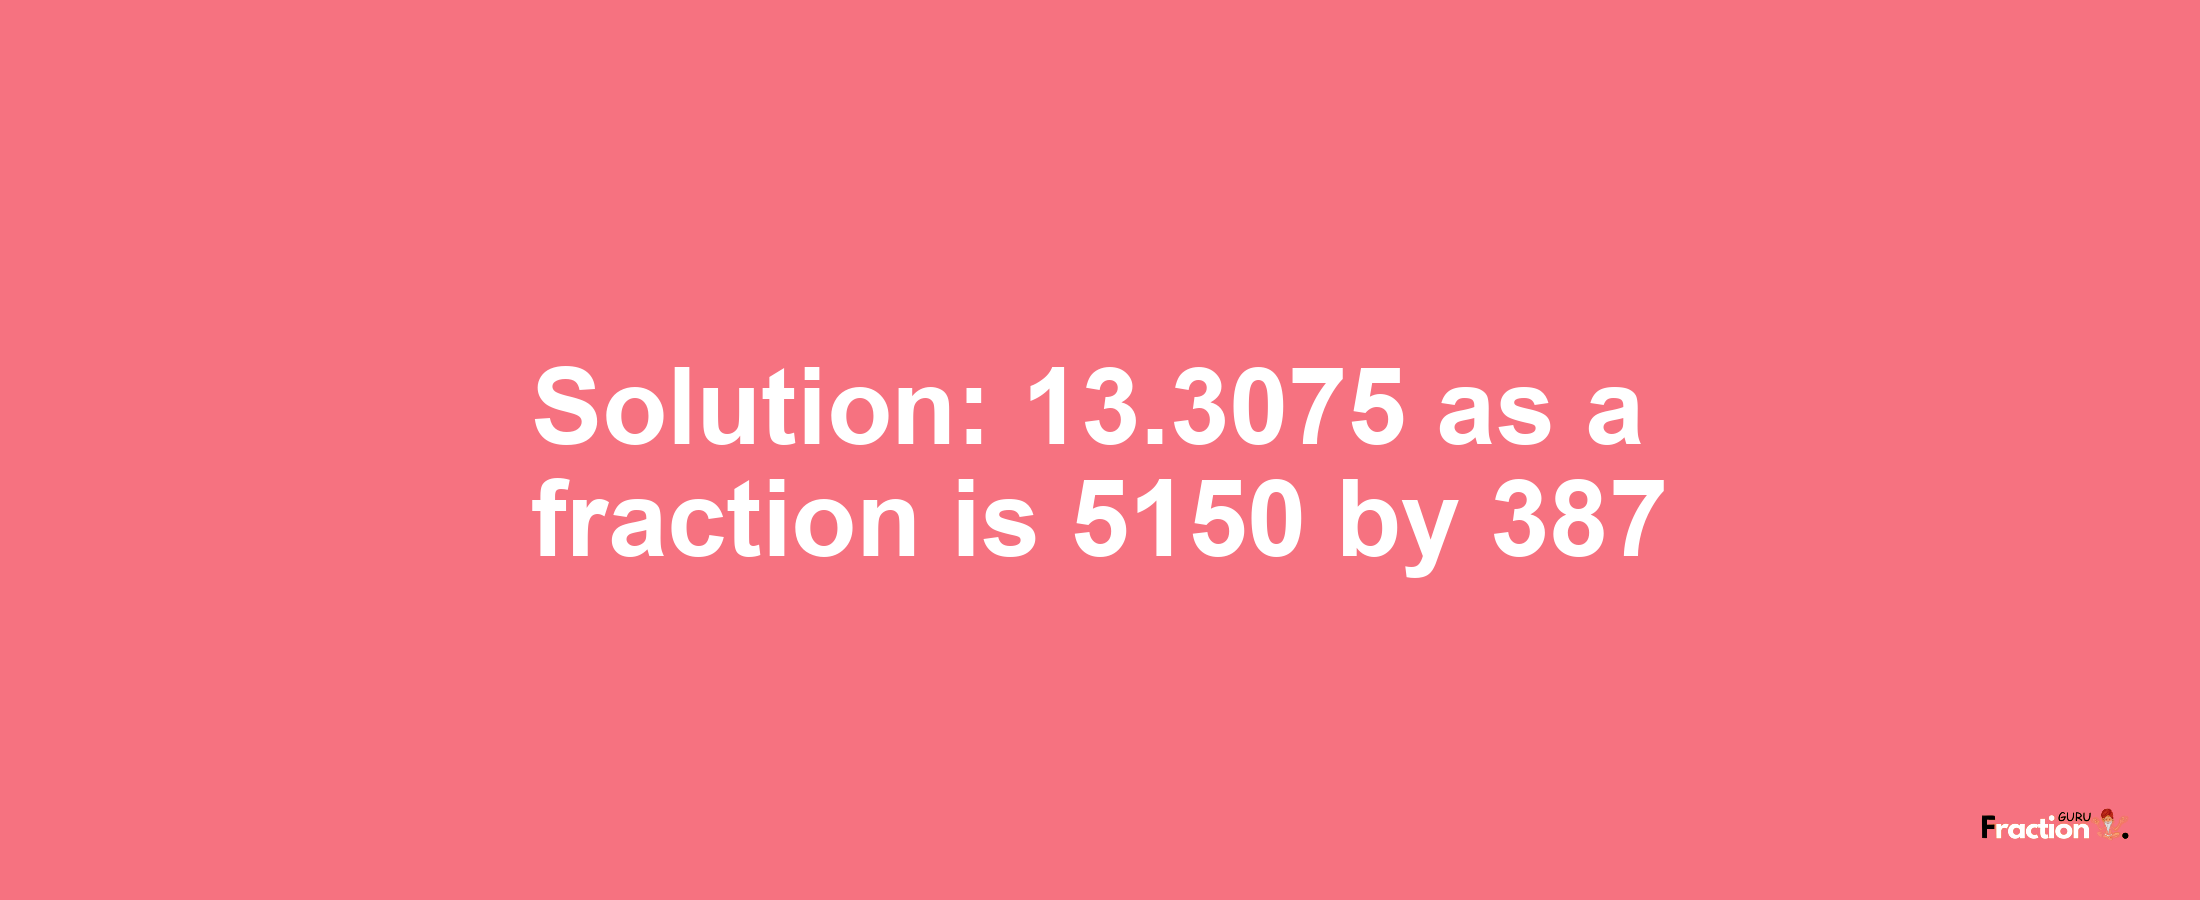 Solution:13.3075 as a fraction is 5150/387